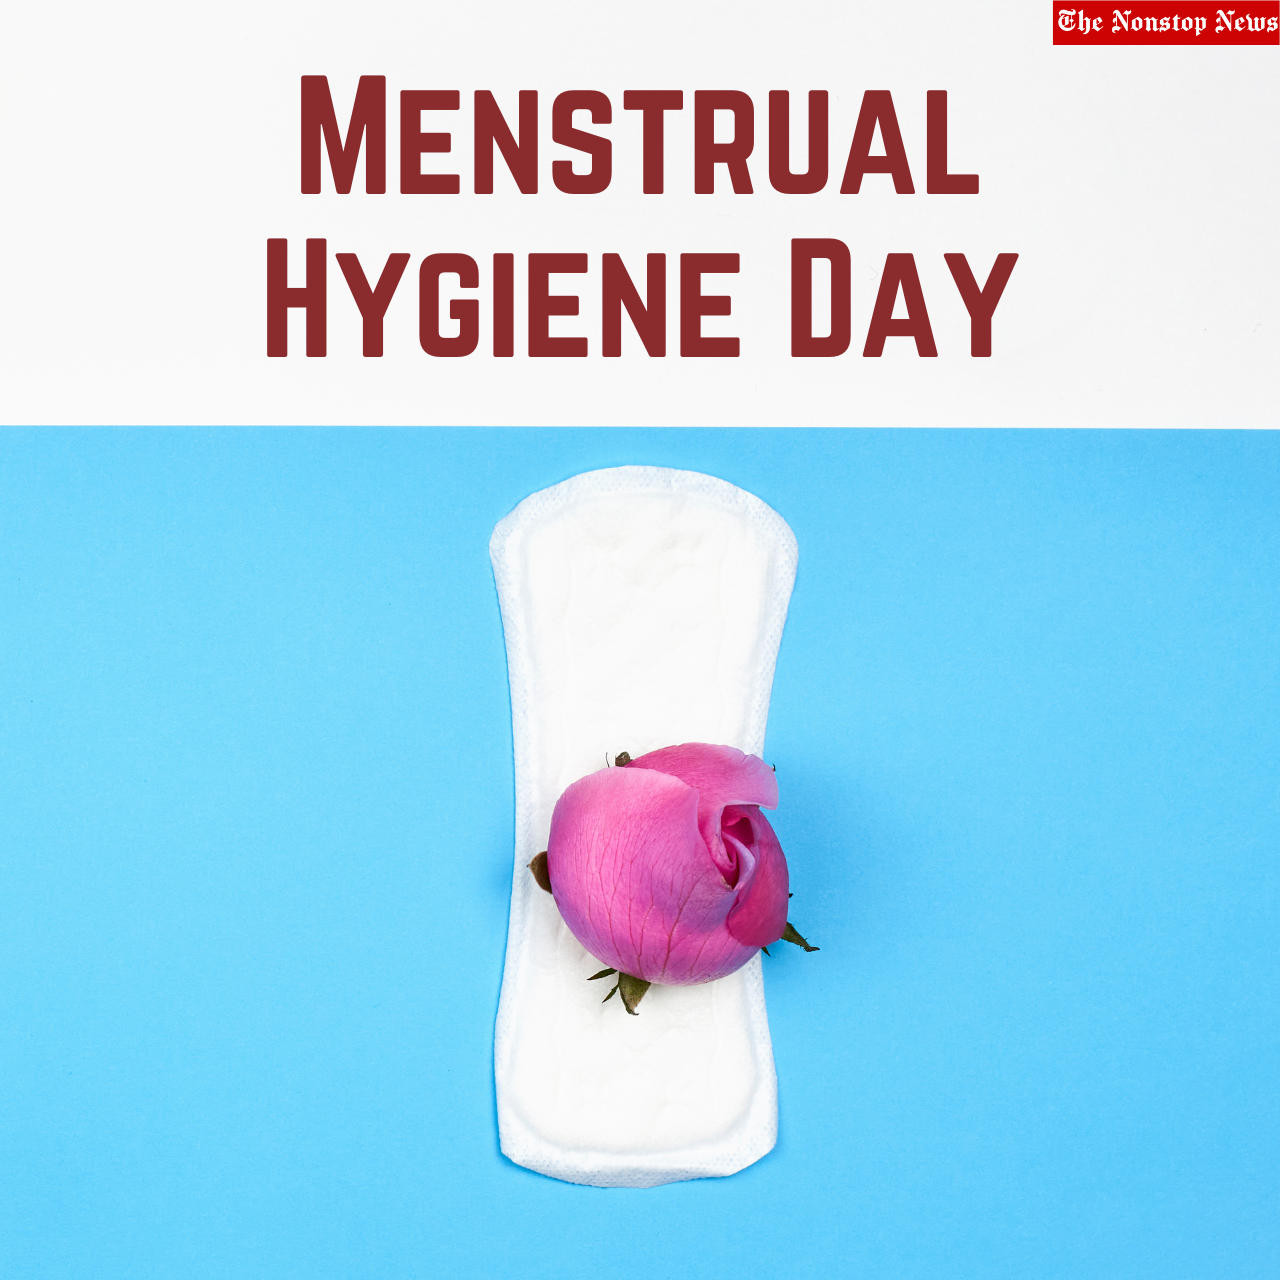 Menstrual Hygiene Day 2022: Current Theme, Quotes, Messages, Posters, and Images to highlight the importance of good menstrual hygiene management at a global level